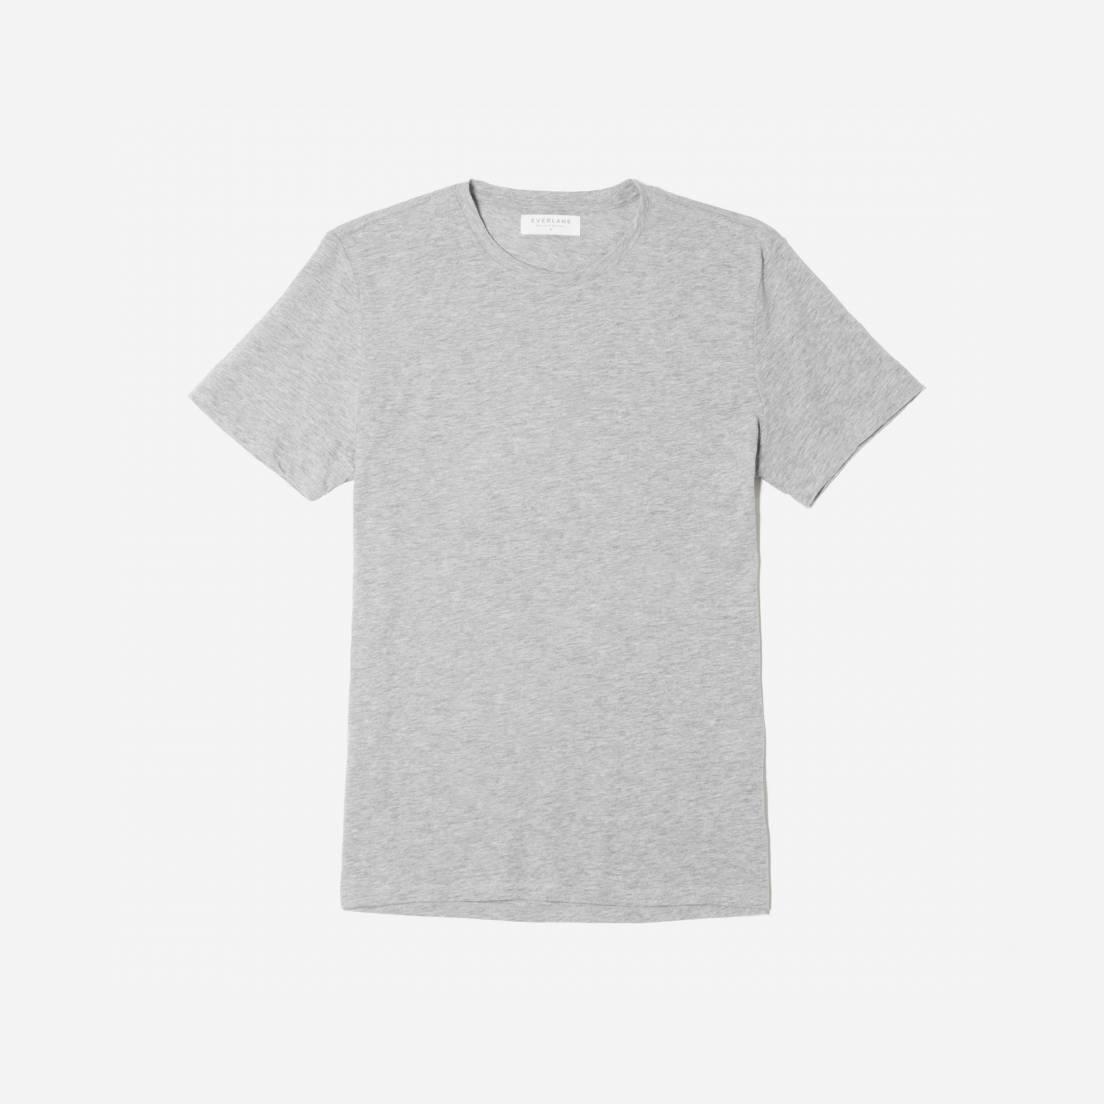 This Is The Perfect Men's Summer T-Shirt & It's Only $22